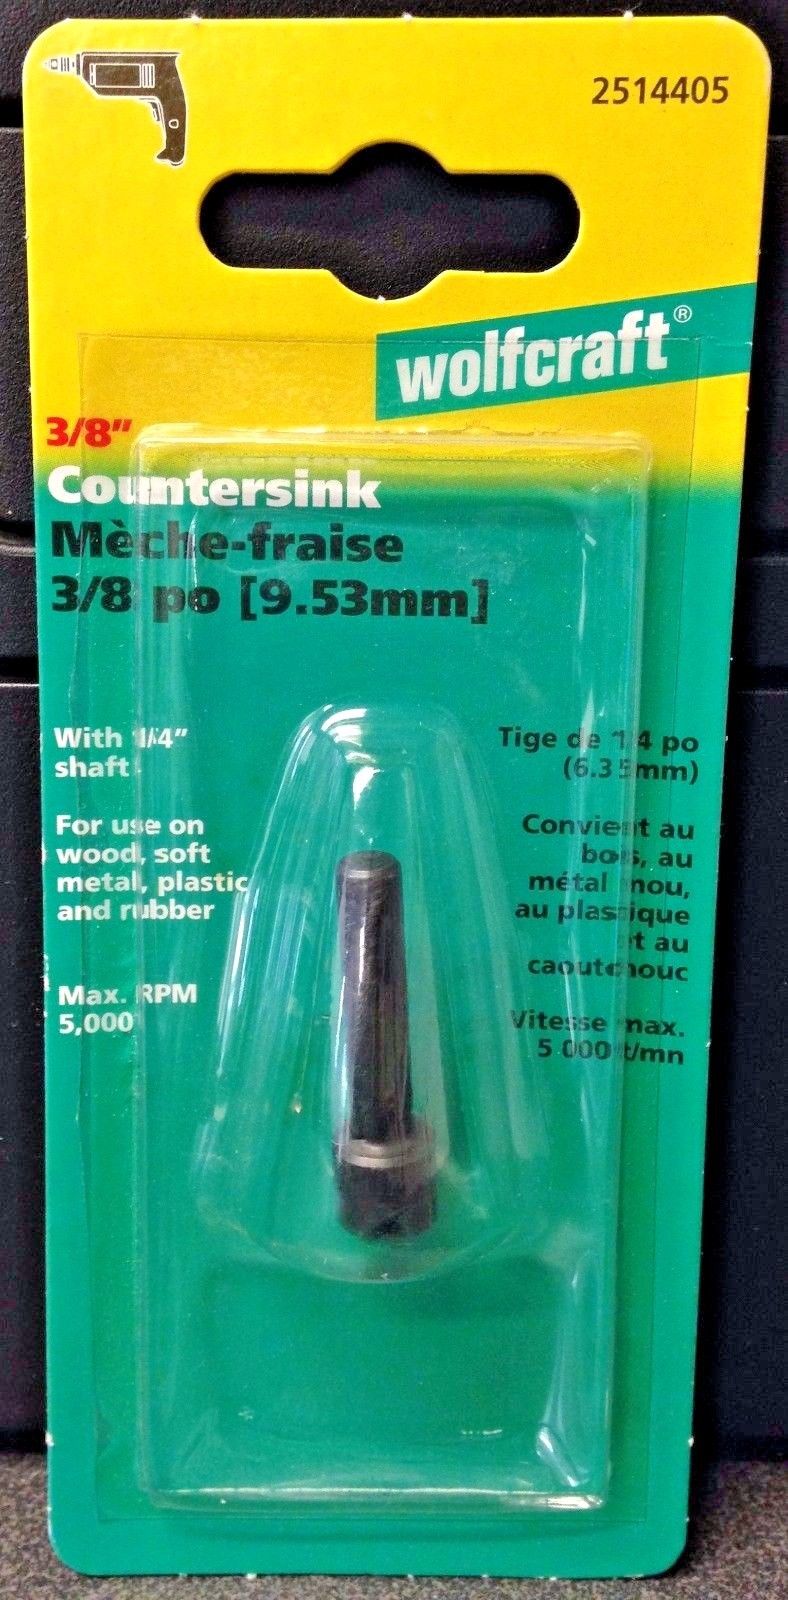 Wolfcraft 2514405 3/8" Countersink With 1/4" Shaft Made In Germany